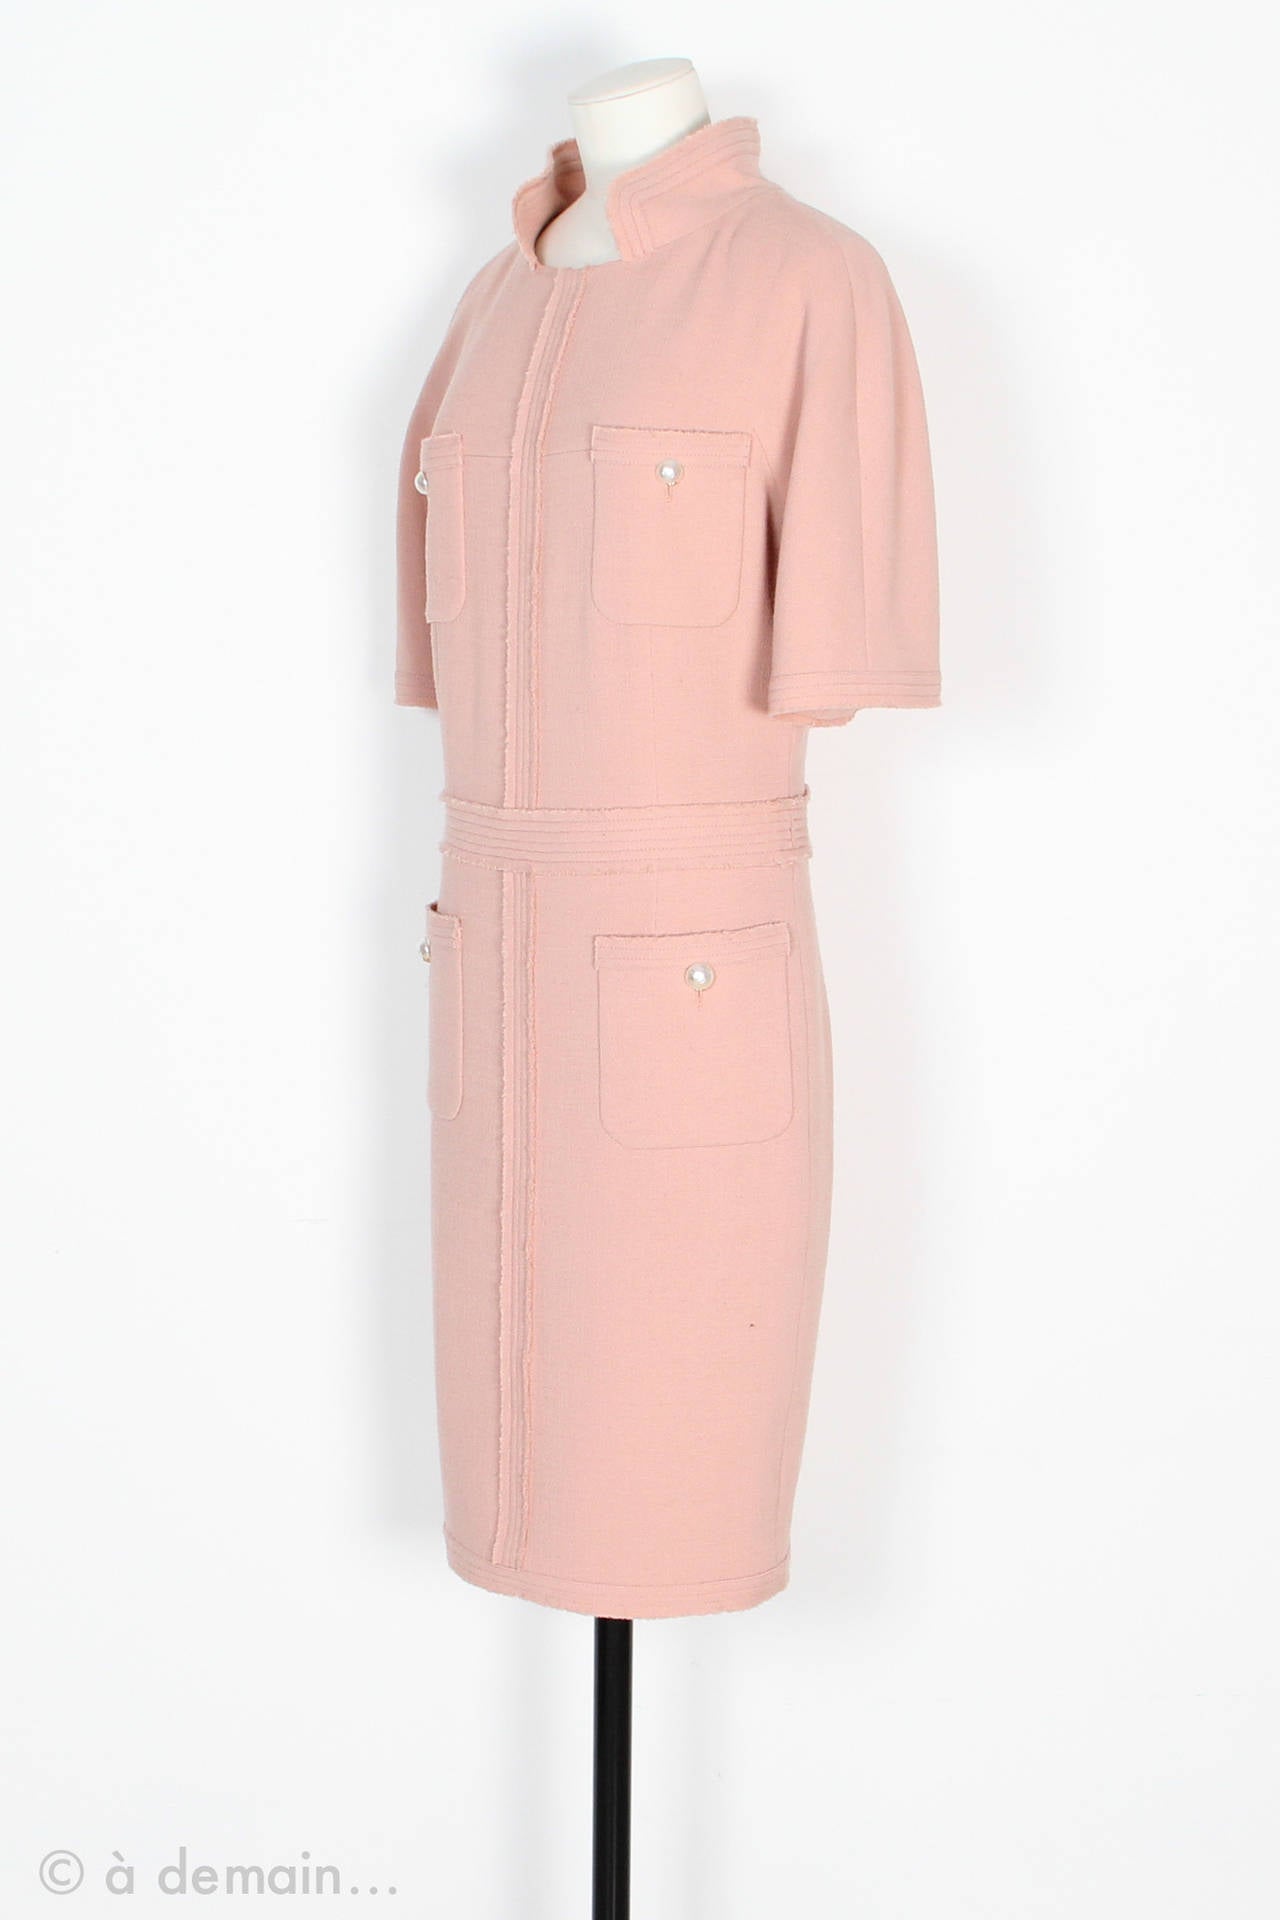 Chanel Dress made in France in pink wool and lined with pink silk. Short sleeves. 4 pockets closed by a large pearly button with the famous X on it. Matching waistband sewn on the dress. Zip on the bottom of the skirt to hide or show the legs. Zip